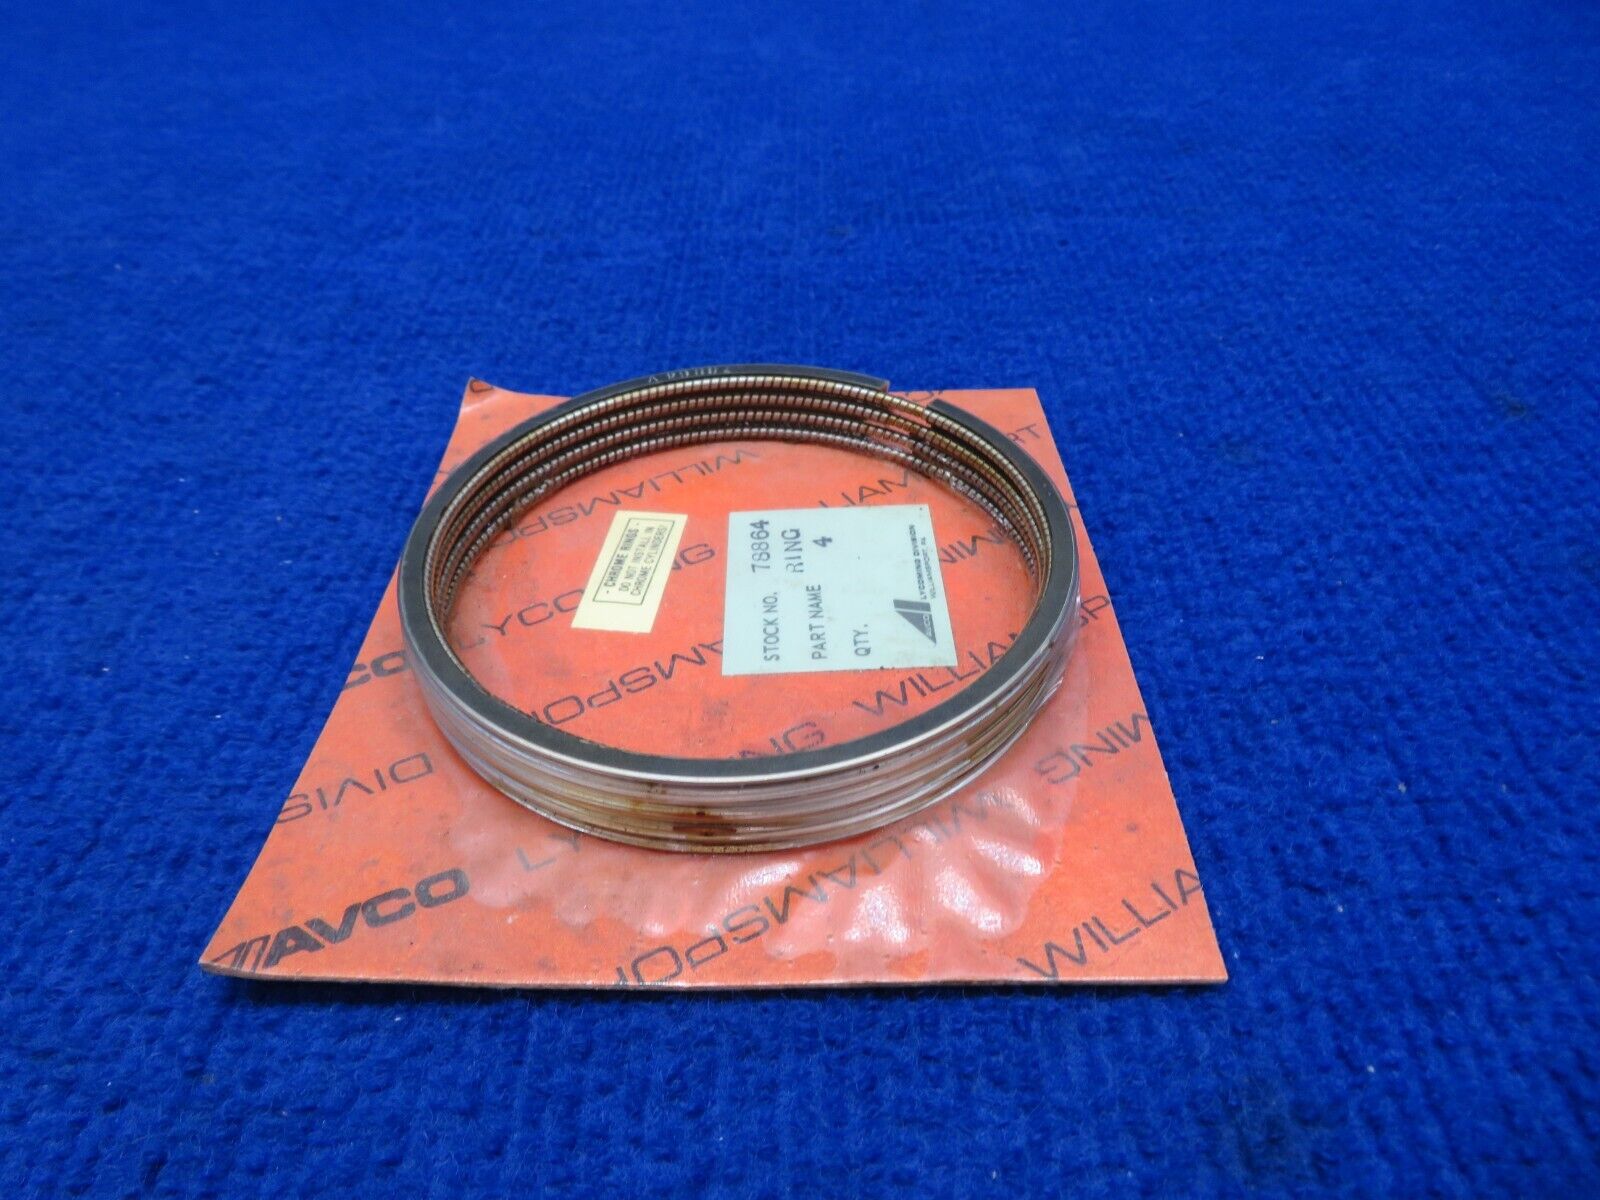 Lycoming - 14H21950 - Piston ring OIL 5.125 BORE - Old P-N 73857